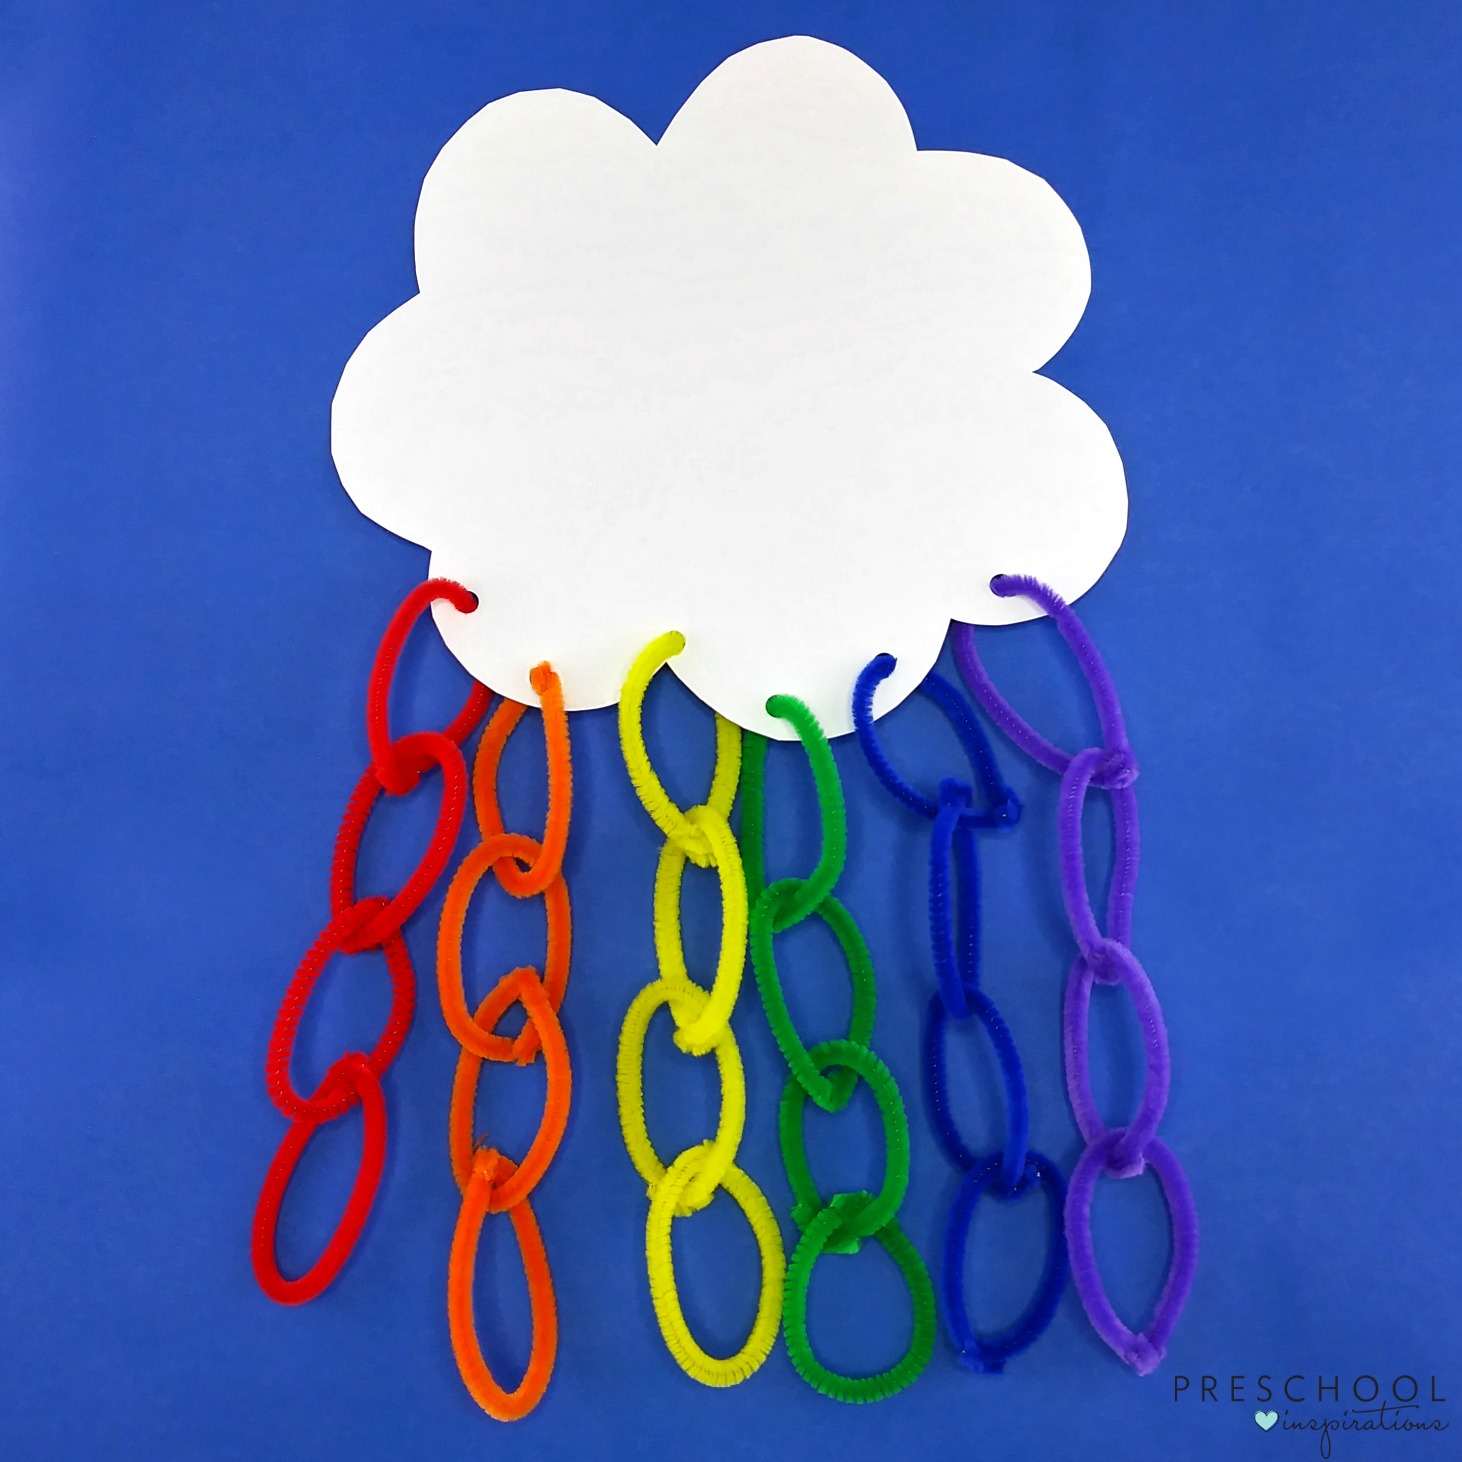 Preschool rainbow craft with colorful pipe cleaners